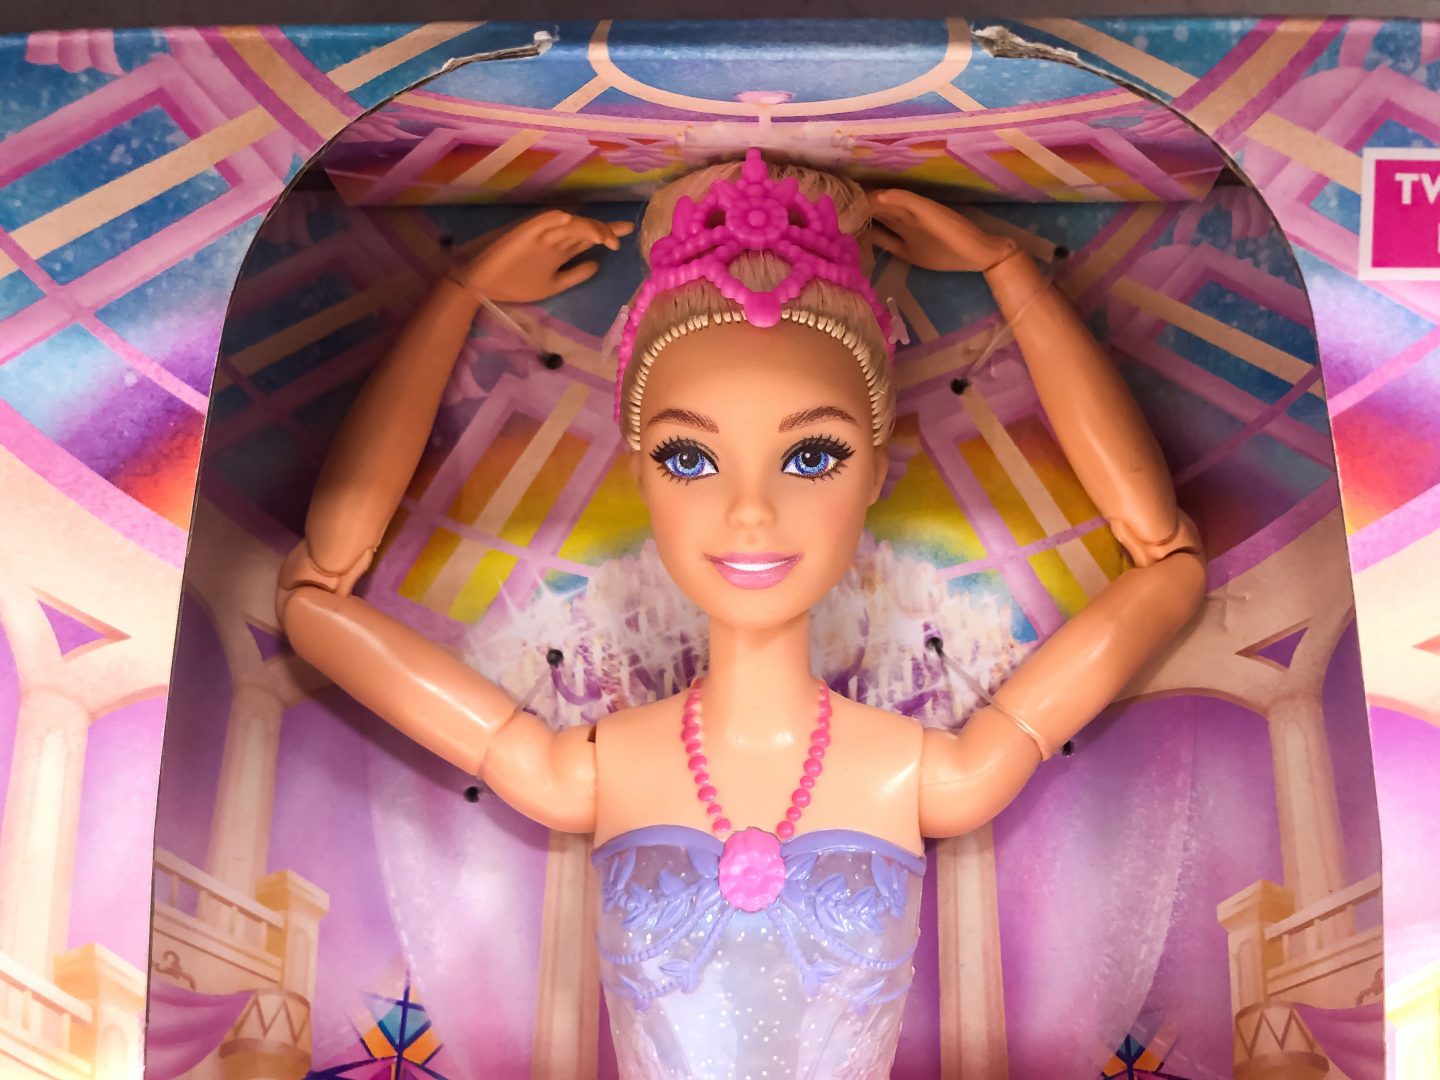 MADRID, SPAIN - JULY 19: Detail of the Barbie doll in its box is seen on the stand of a toy store on July 19, 2023 in Madrid, Spain. The demand for the doll has increased by 17% among Spanish consumers, according to a recent study by the online price comparator, idealo.es. (Photo by David Benito/Getty Images)